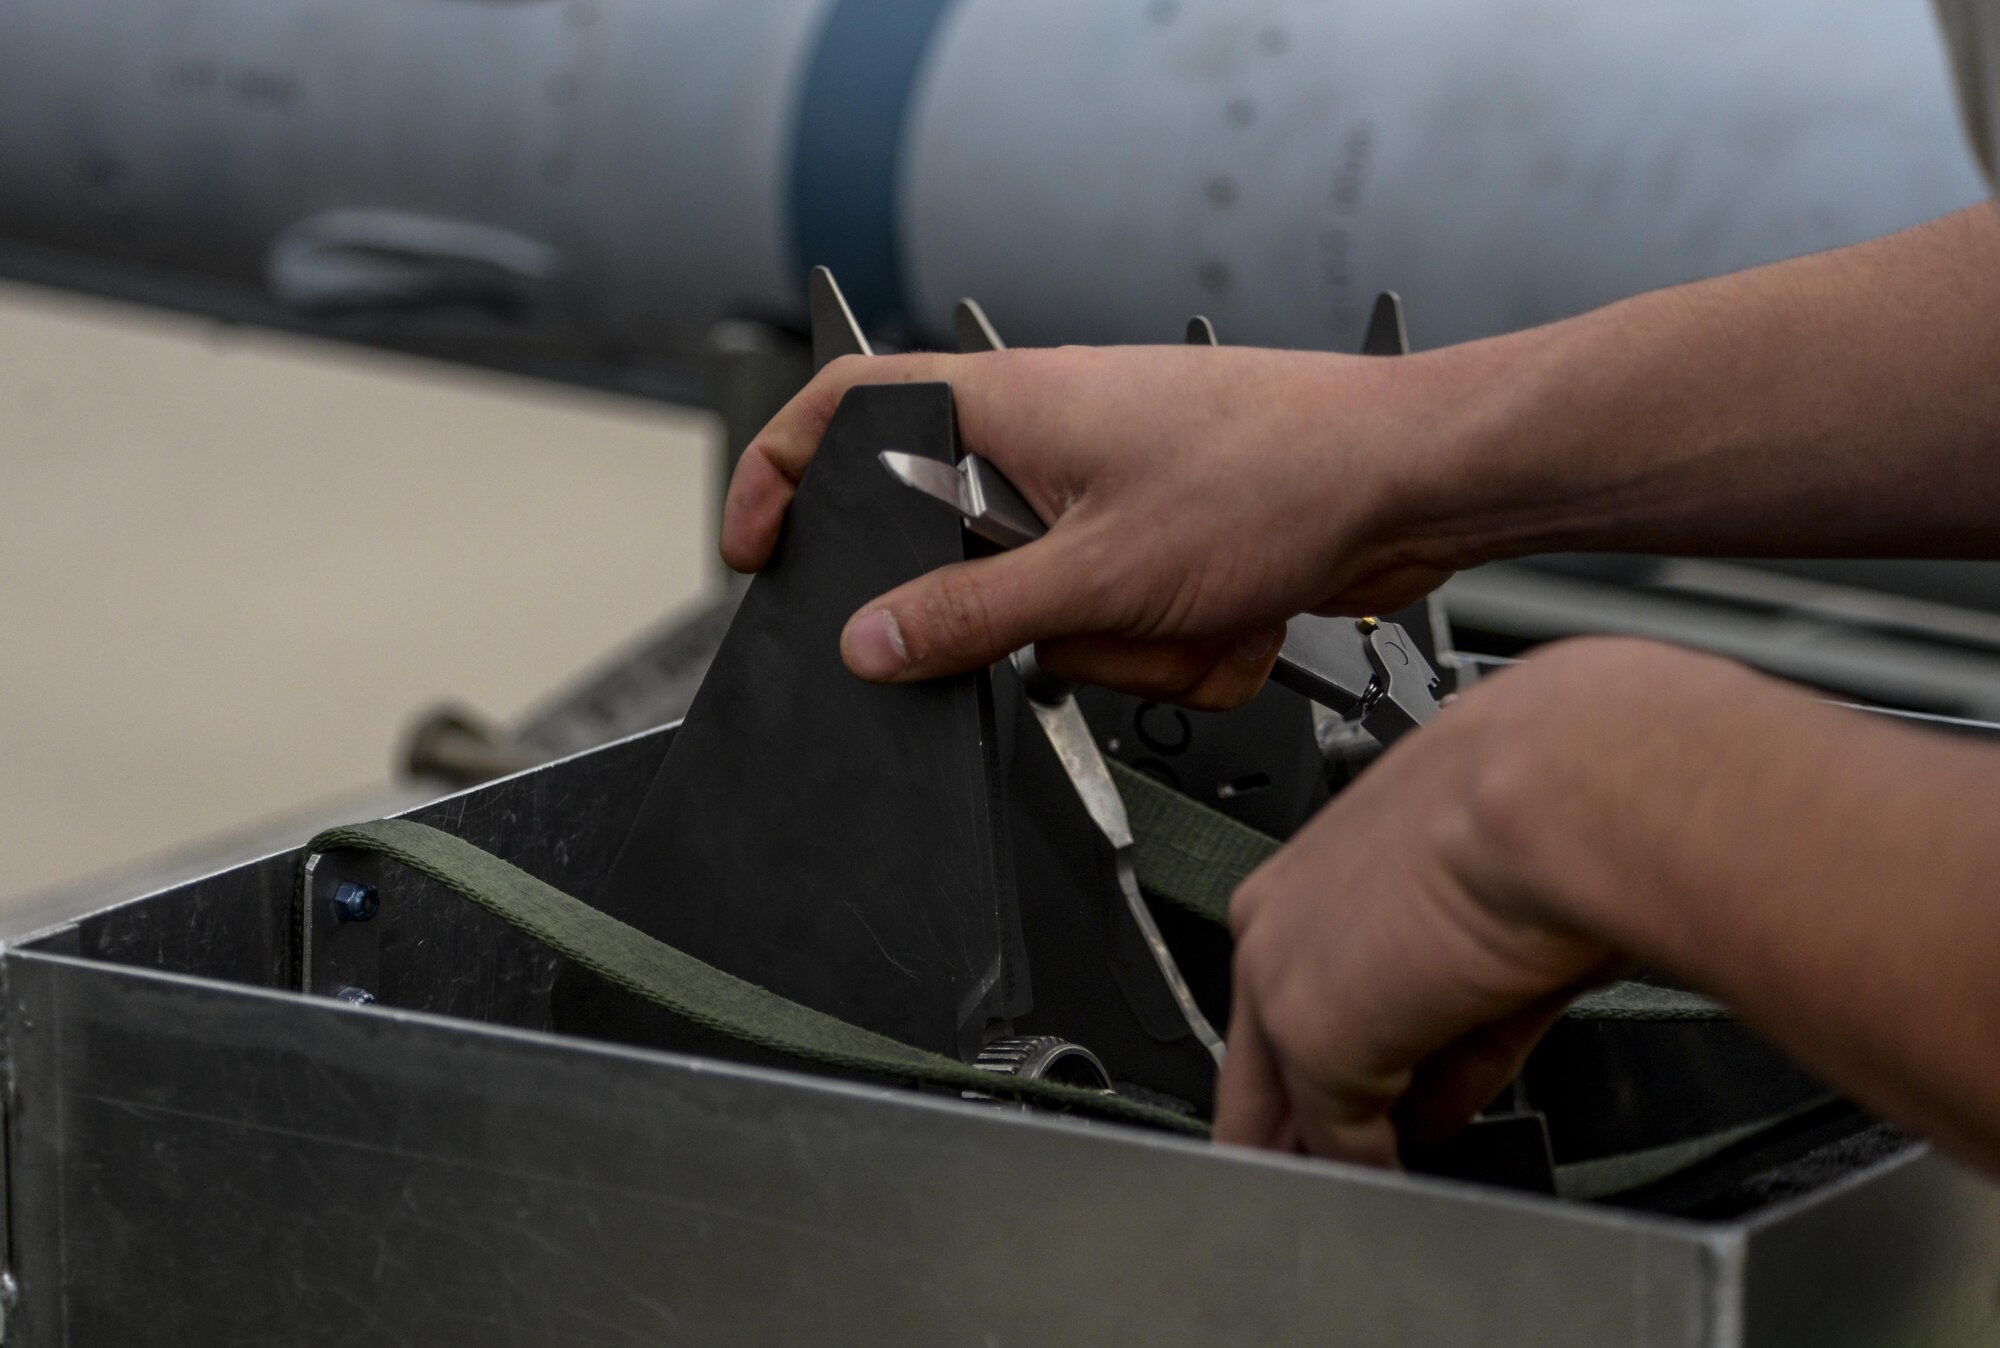 An Airman unhooks the wings of a missile during the 57th Wing Load Crew of the Quarter Competition at Nellis Air Force Base, Nev., April 8, 2016. Crews are inspected on their dress and appearance, orderliness of their tool boxes, the weapons load, and a written test to determine the 57th Maintenance Group’s best weapons load crew of the quarter or year. (U.S. Air Force photo by Airman 1st Class Nathan Byrnes)